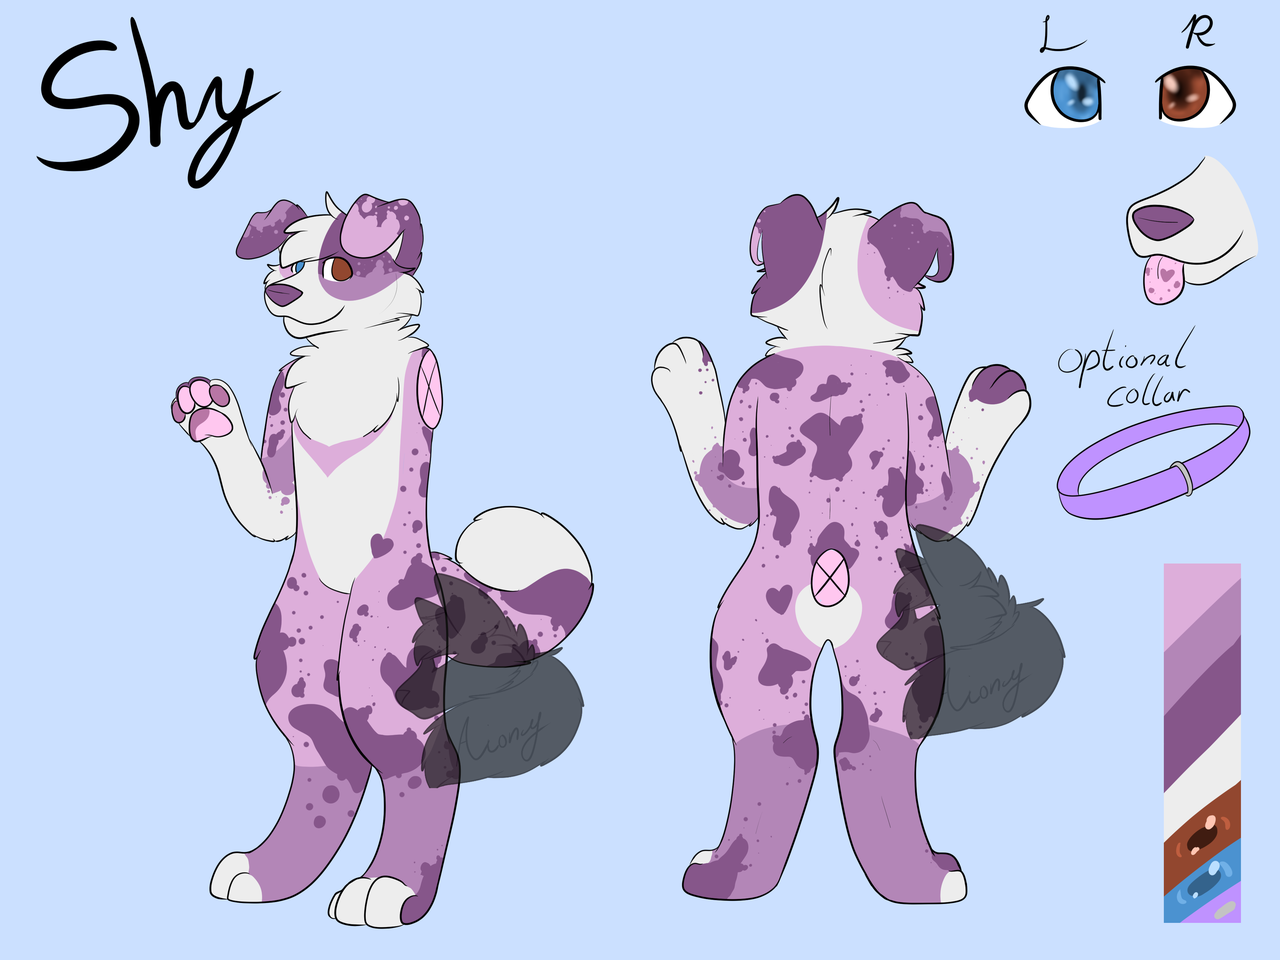 Shy design and ref